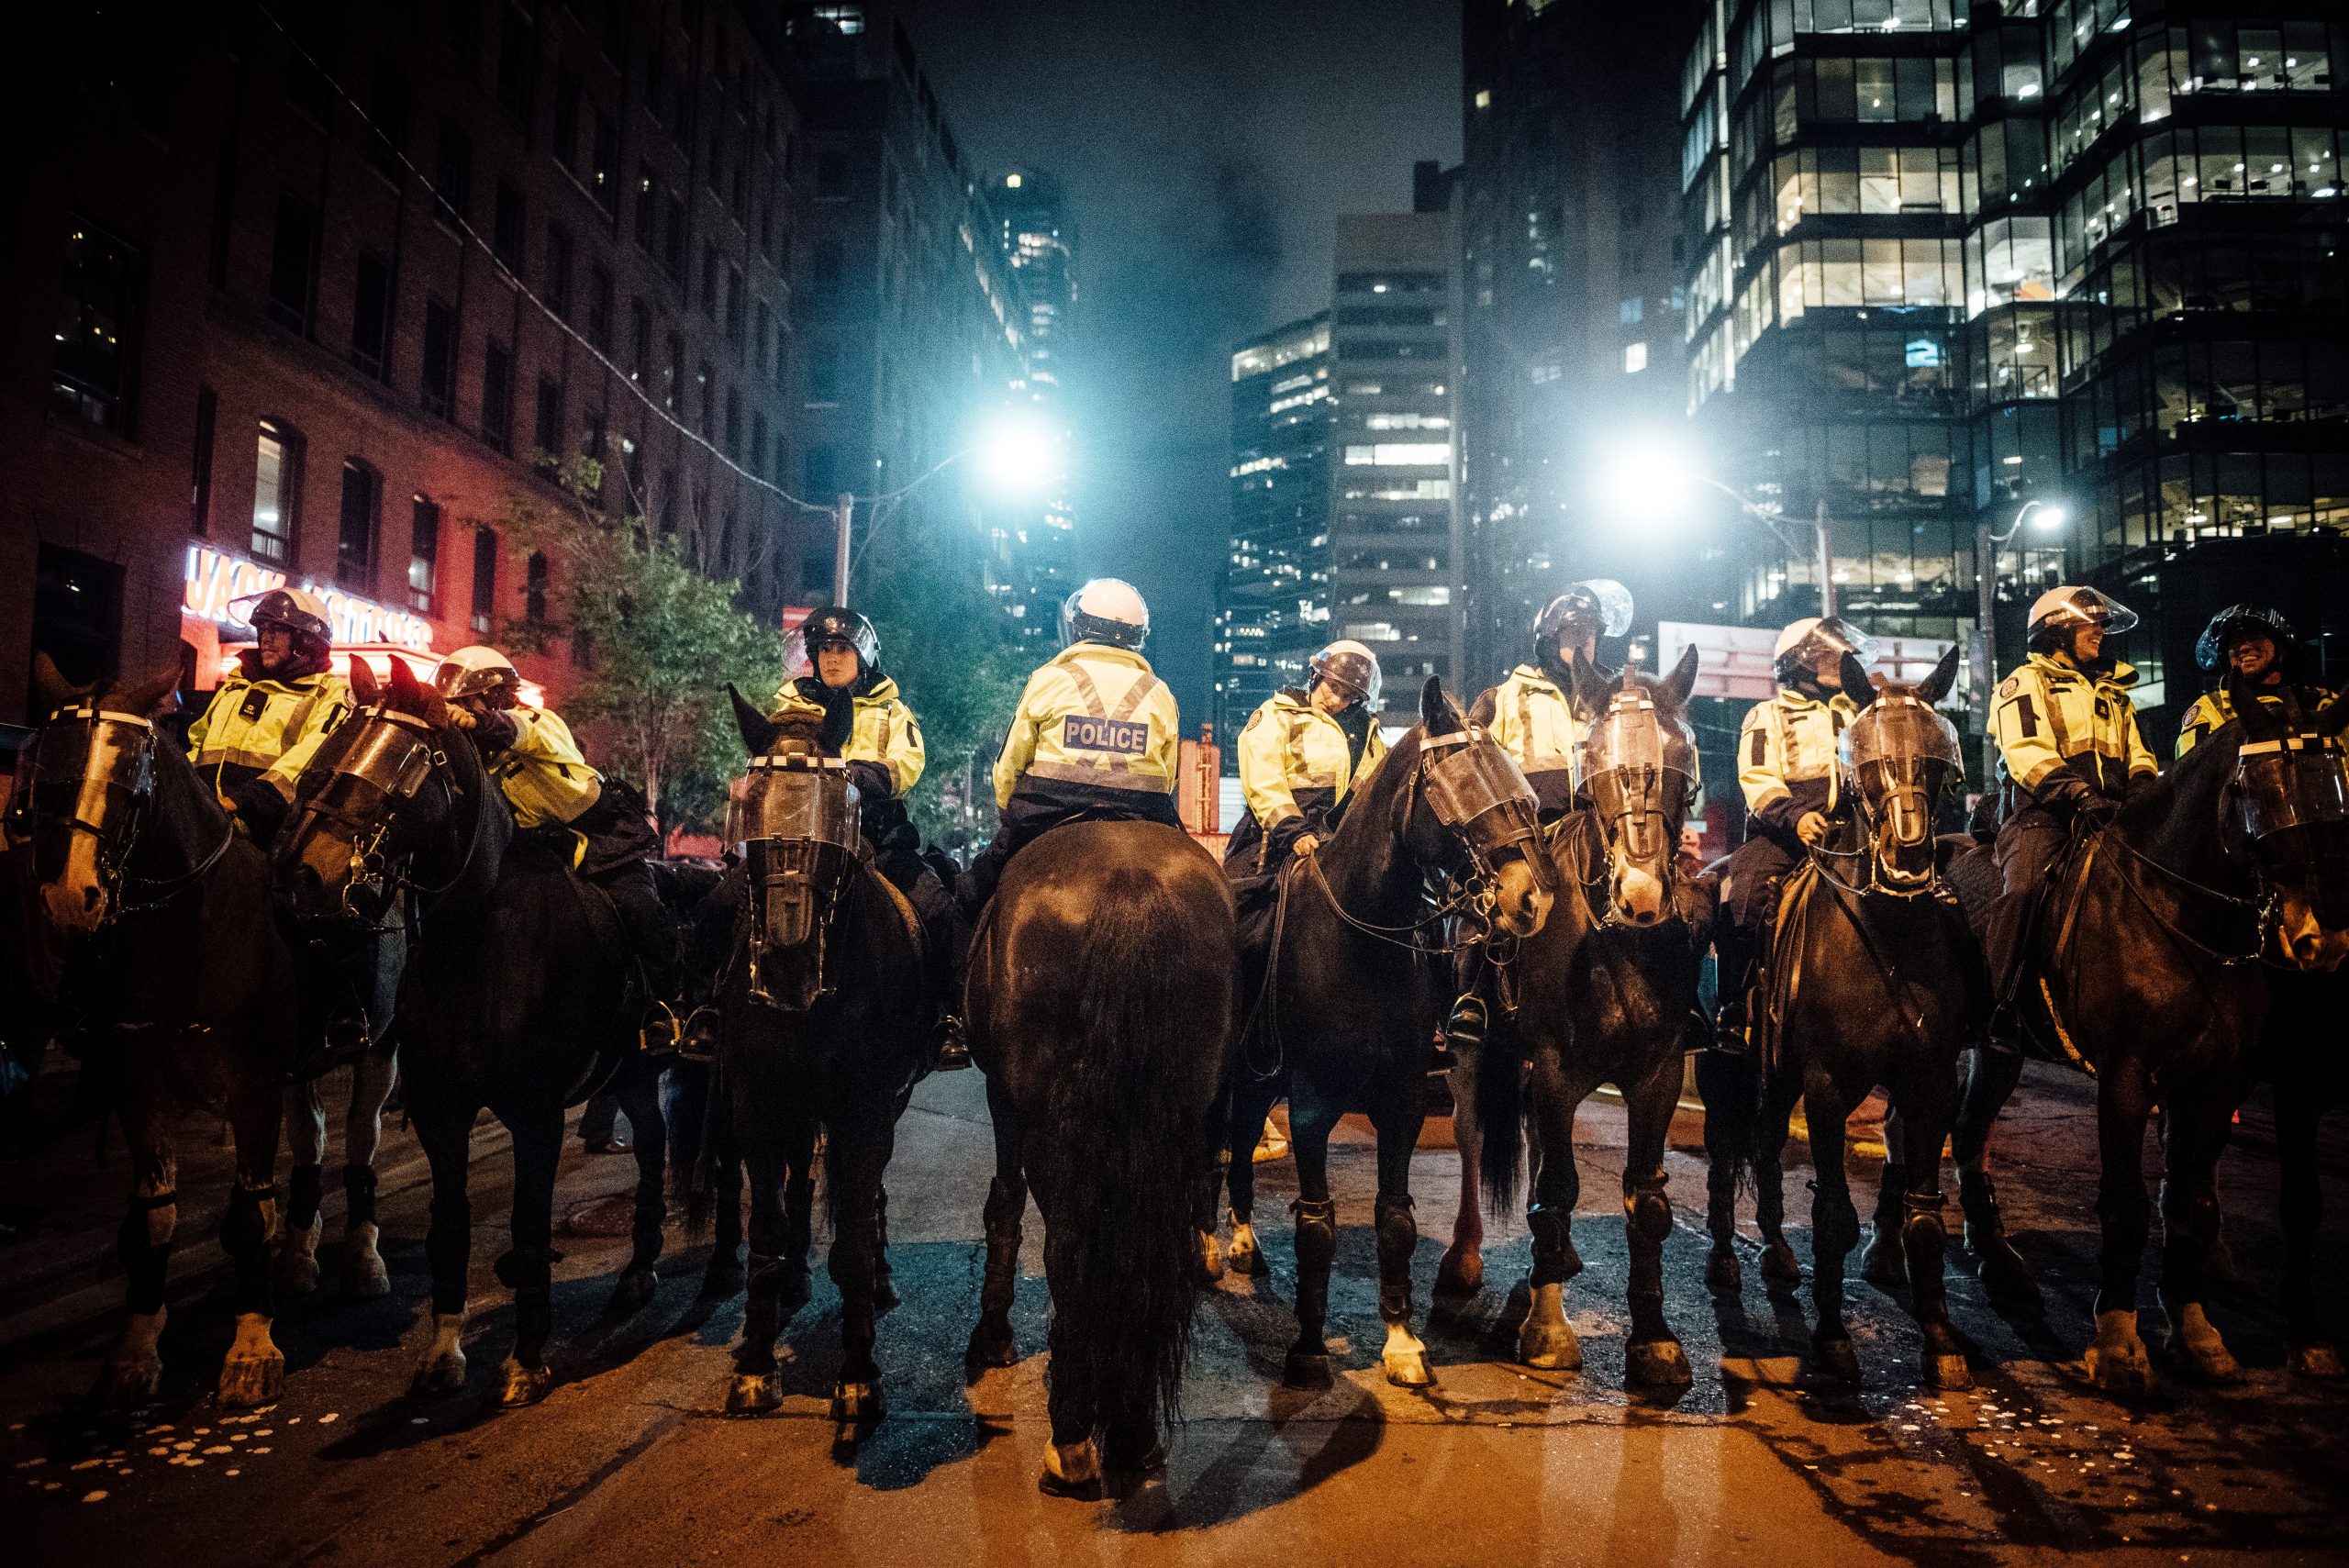 group-of-policemen-on-horse-2834173